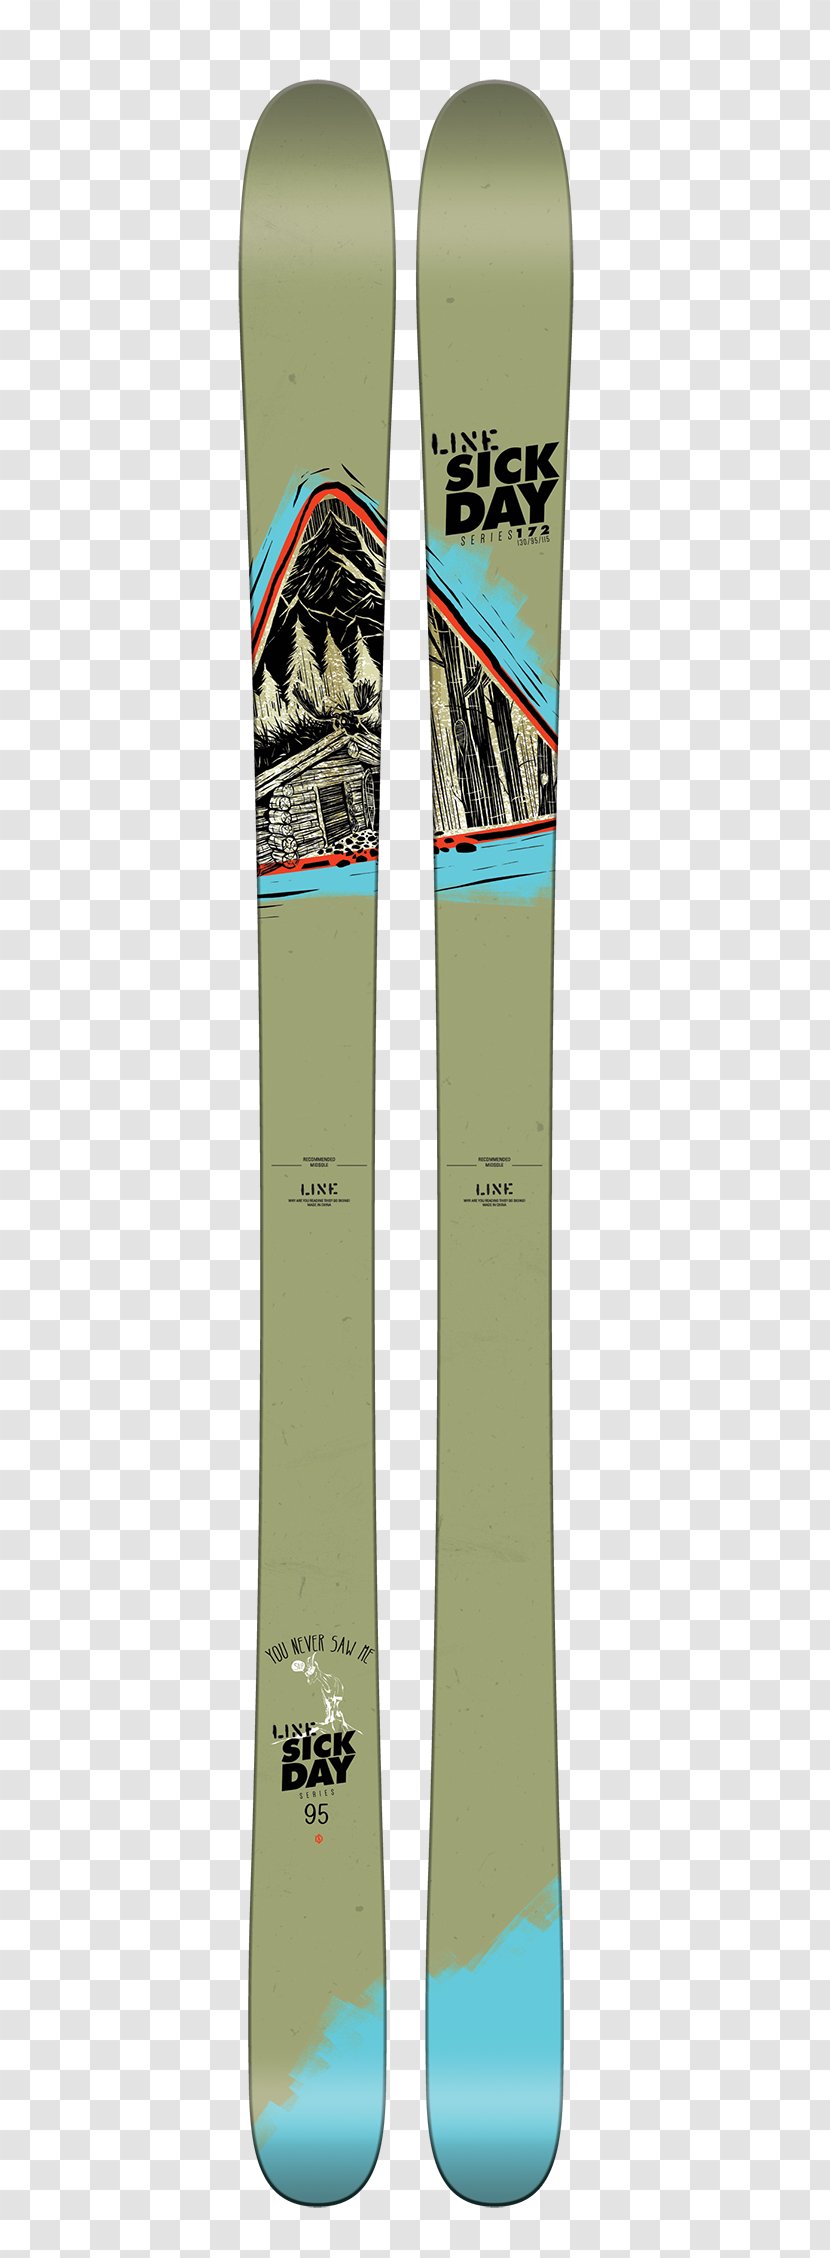 Sporting Goods Line Skis Sick Day 95 2015/16 Twin-tip Ski - Volkl - Backcountry Skiing Transparent PNG